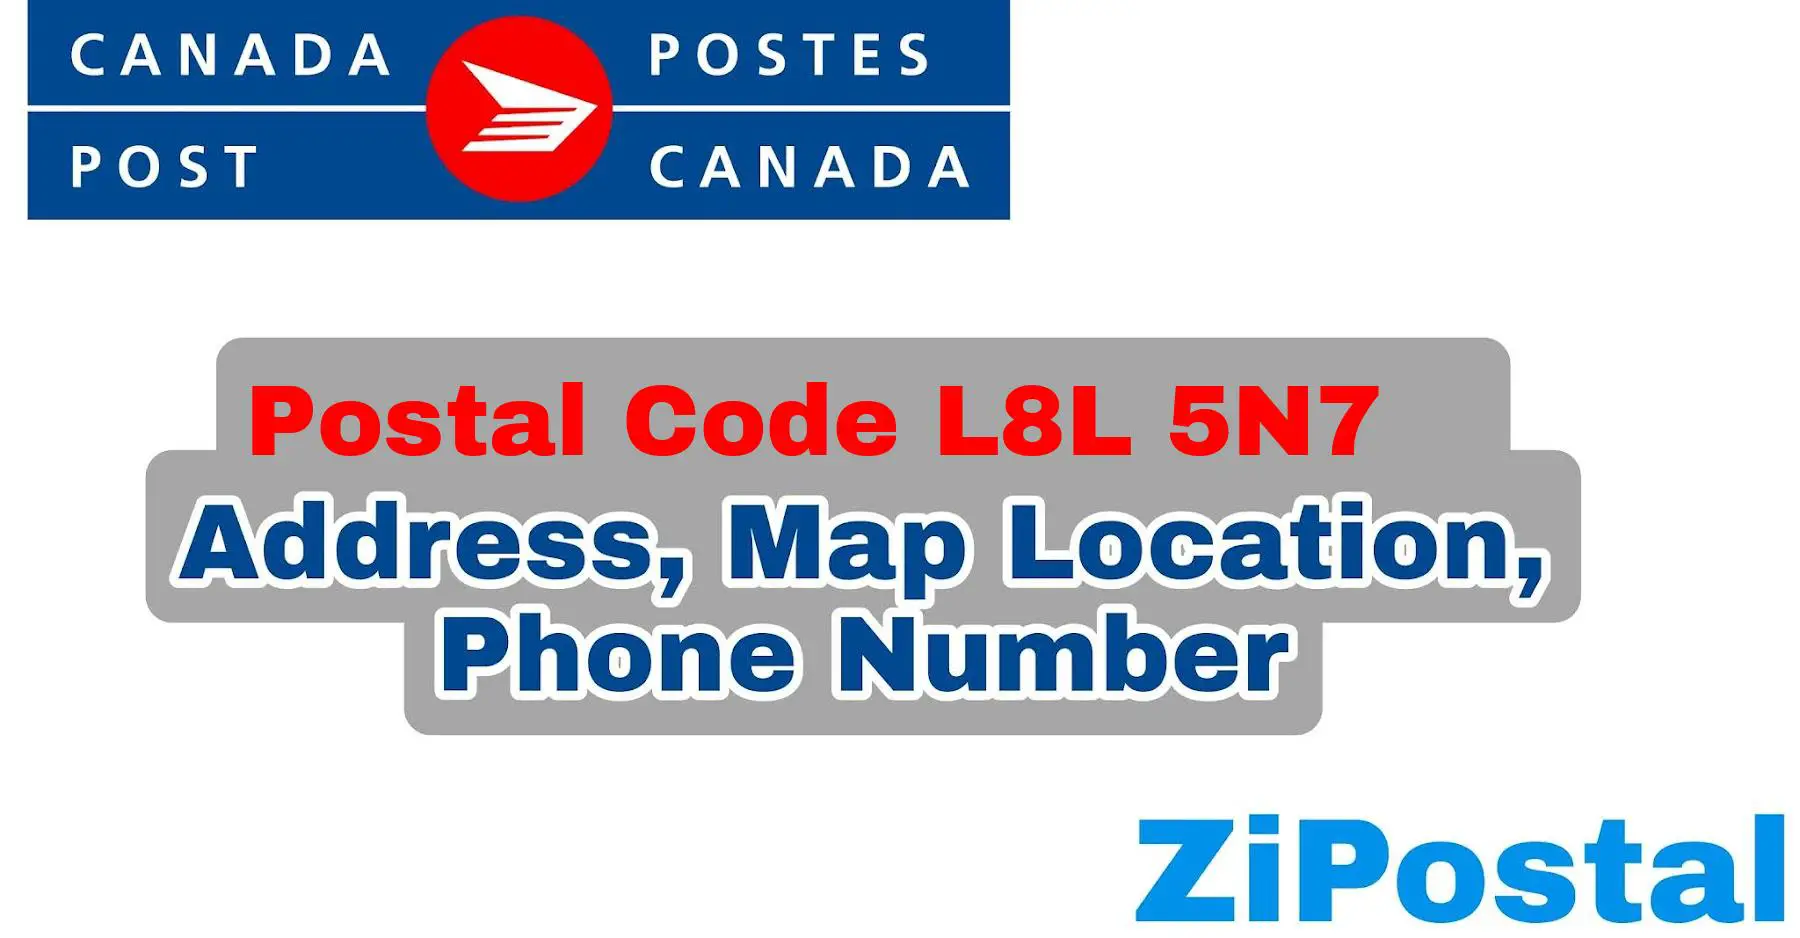 Postal Code L8L 5N7 Address Map Location and Phone Number